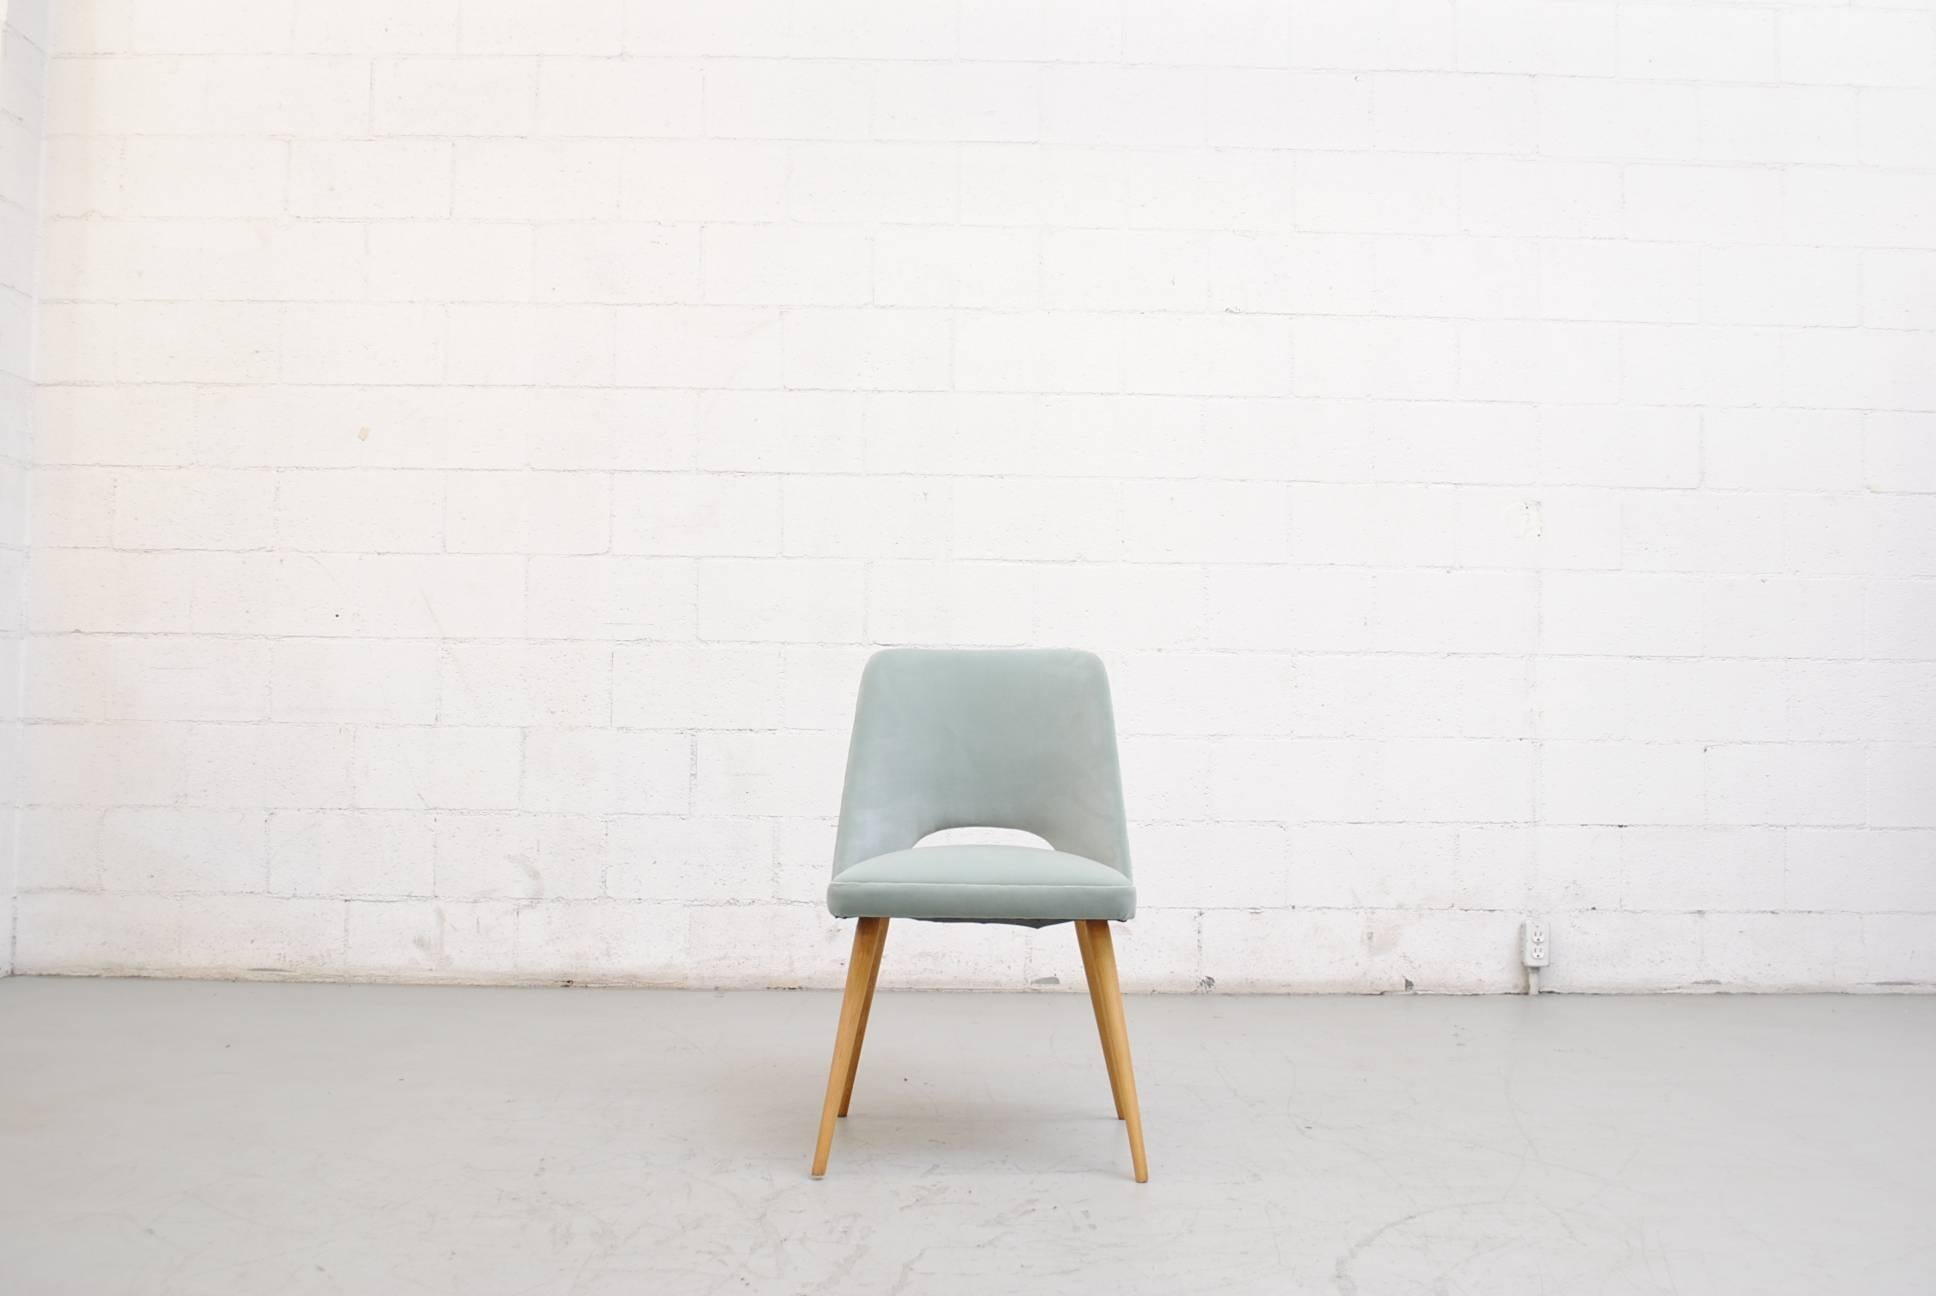 Dutch, mid-century modern dining or cocktail chair. Designed in a style reminiscent of Finnish designing great Eero Saarinen. The chair has handsomely tapered blonde wood legs and has been newly upholstered in lovely teal velvet. Good original